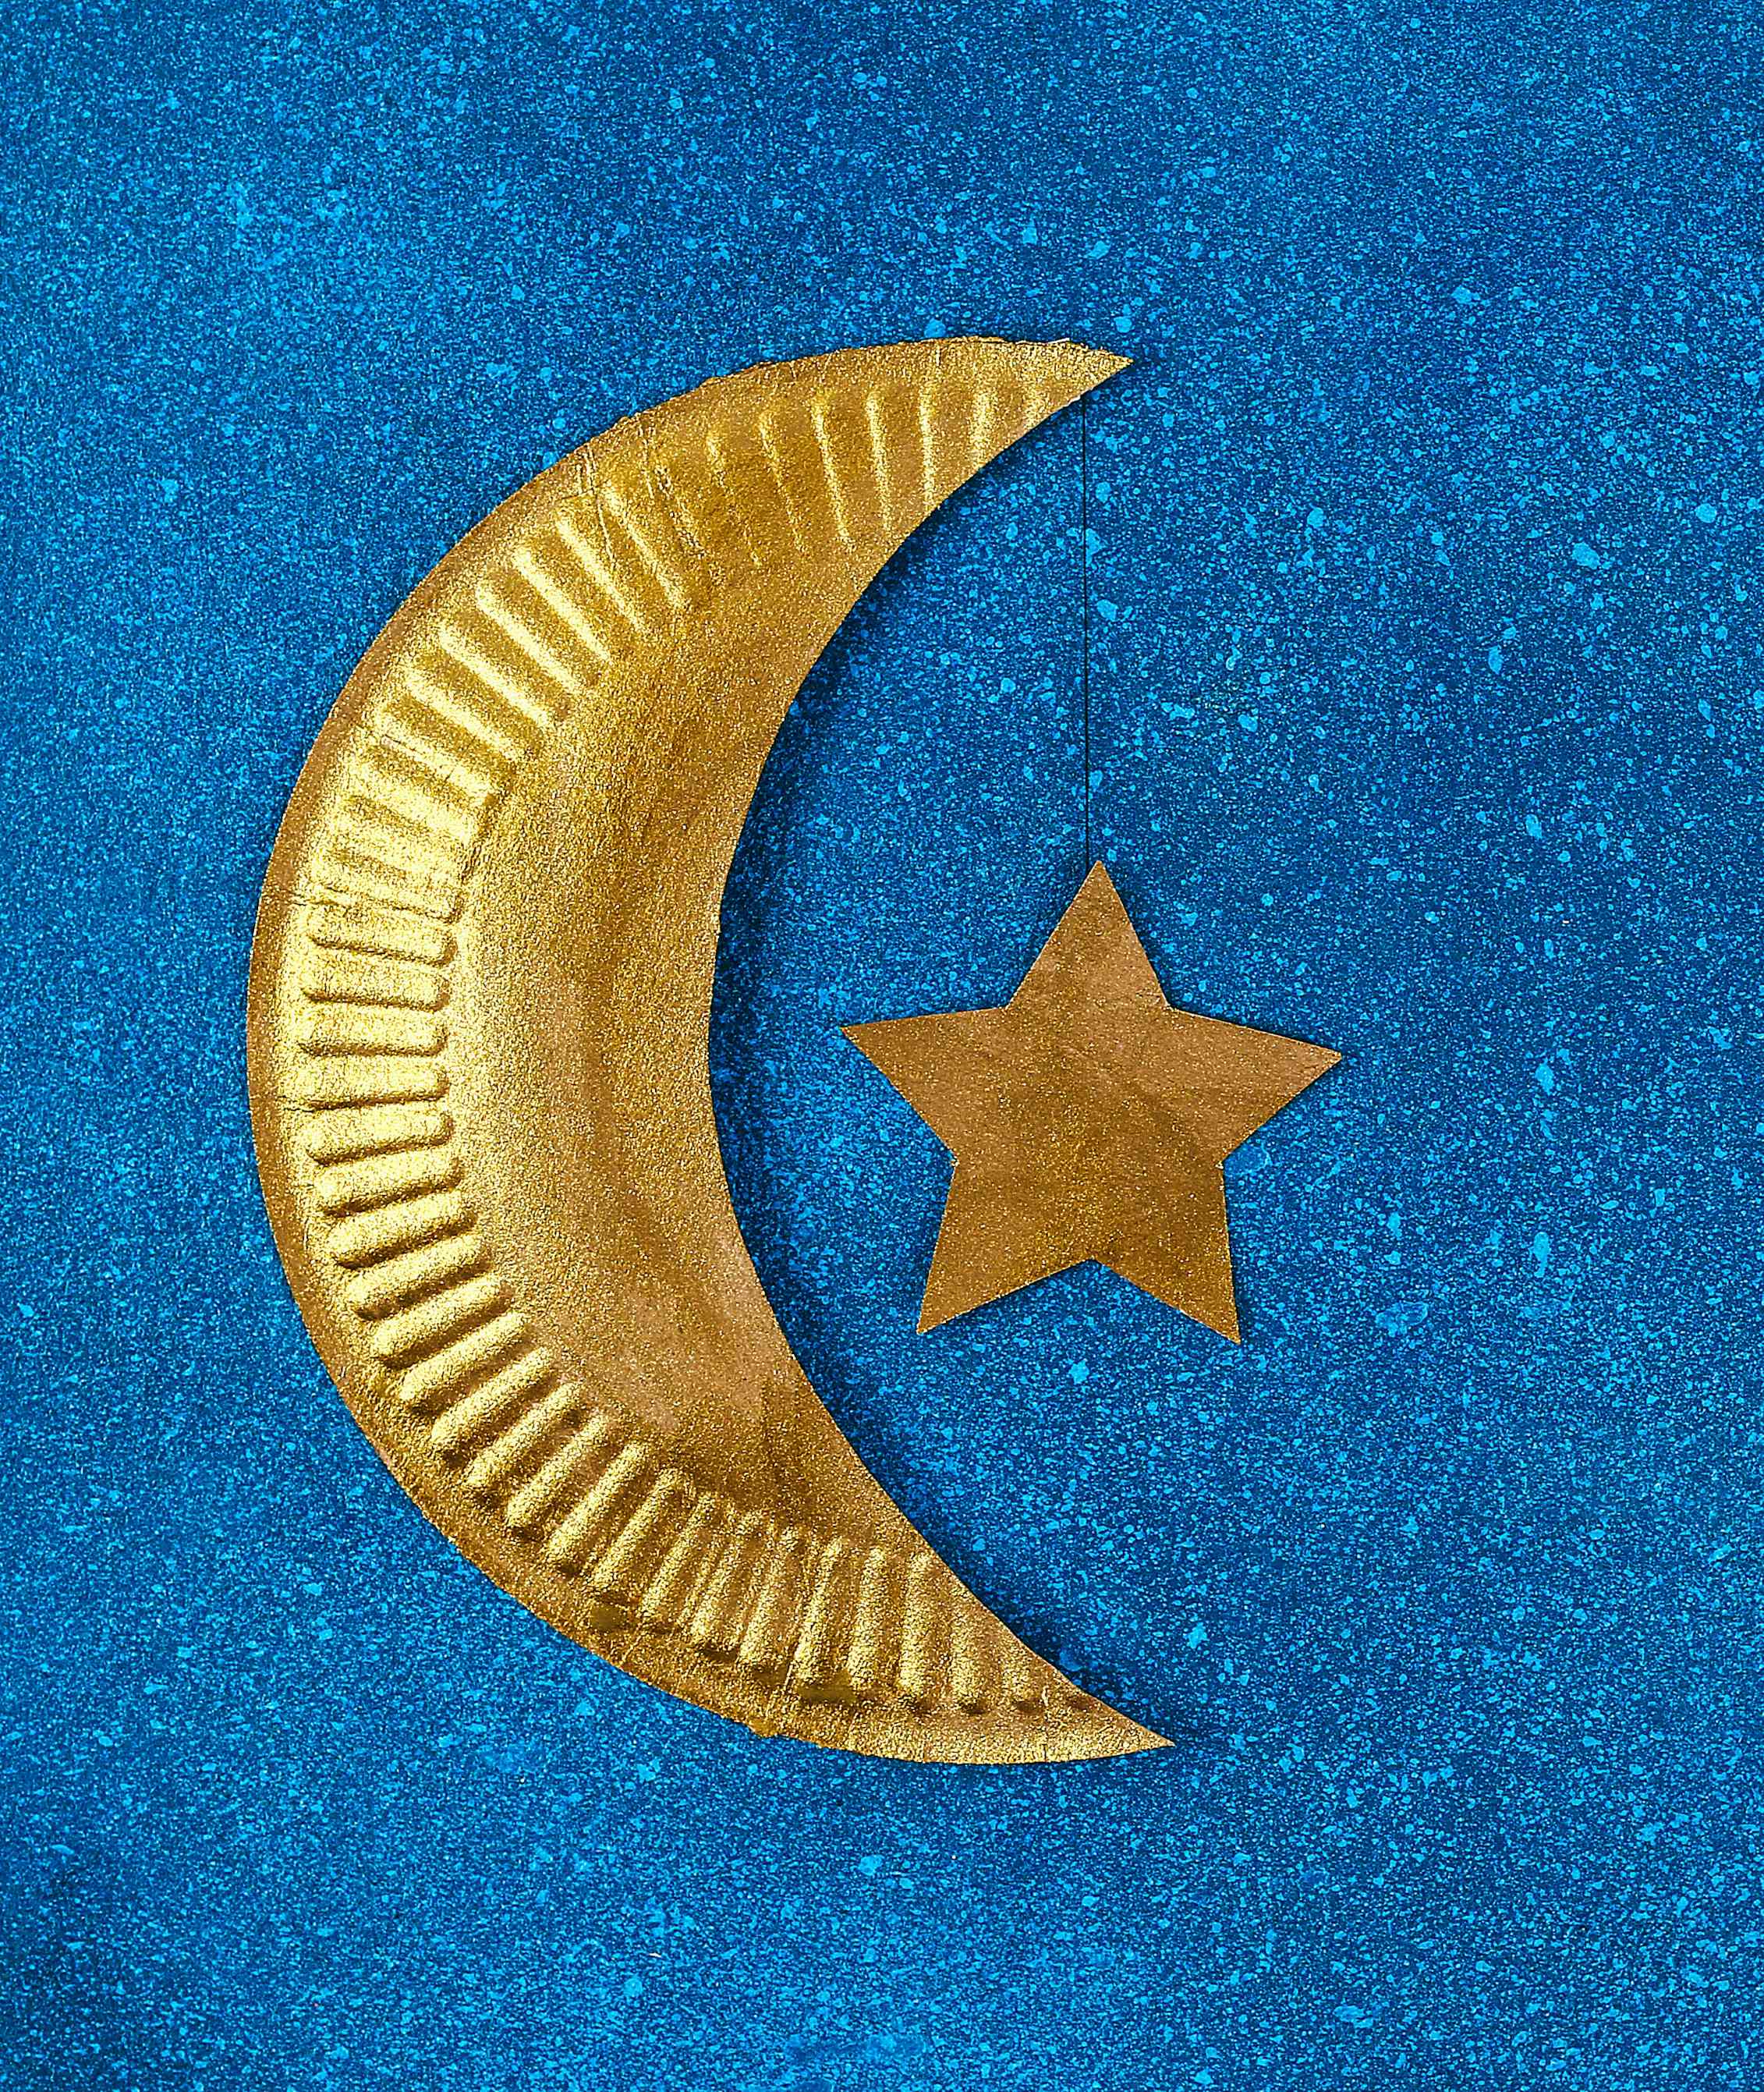 Paper cutout of a crescent moon and star are painted gold.